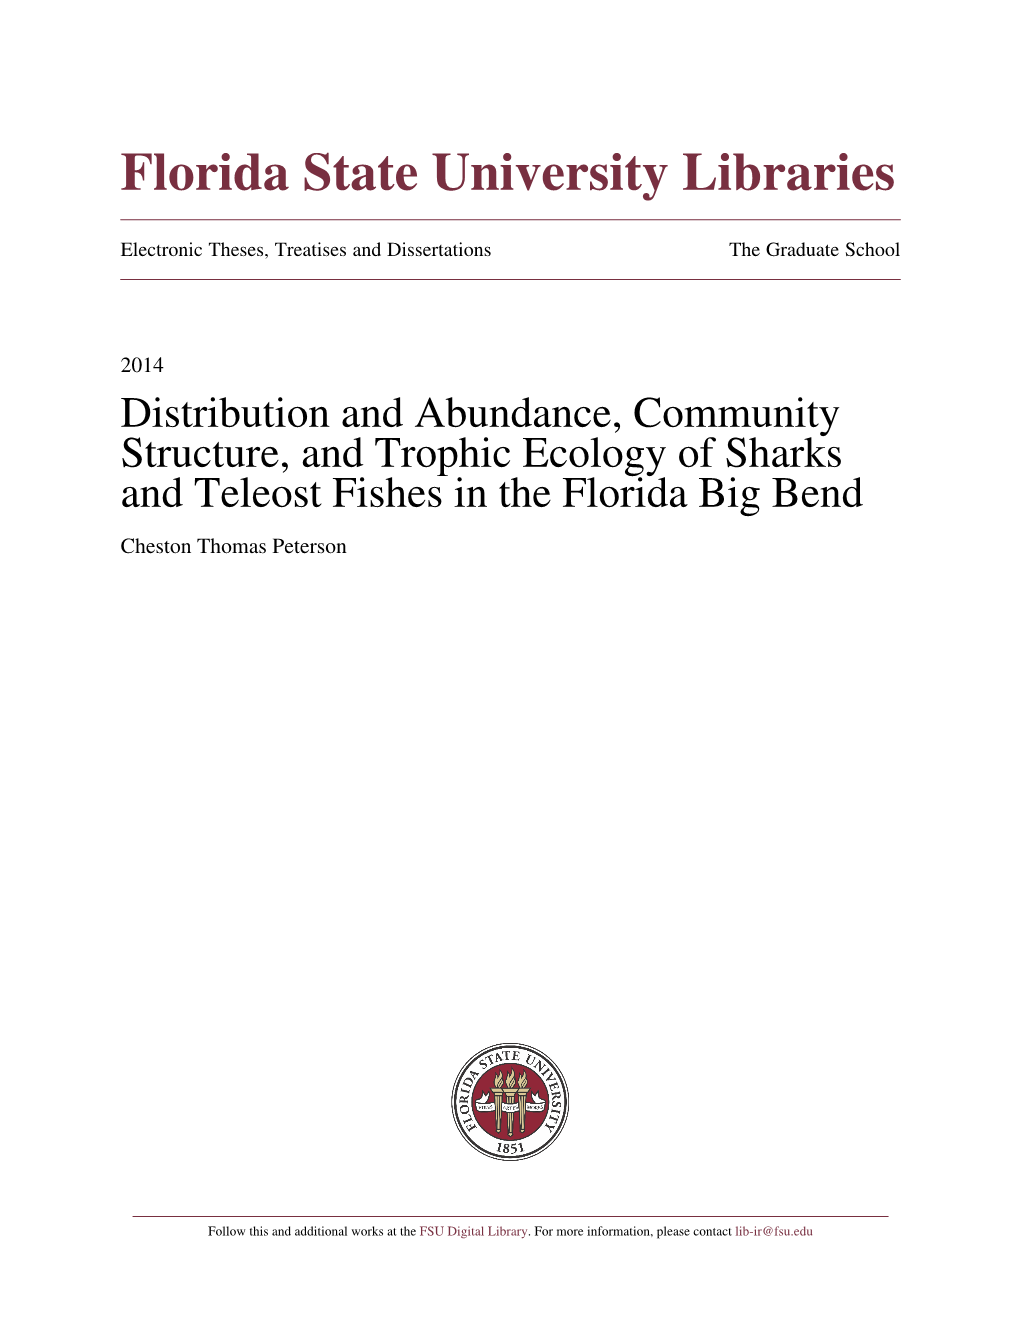 Distribution and Abundance, Community Structure, and Trophic Ecology of Sharks and Teleost Fishes in the Florida Big Bend Cheston Thomas Peterson